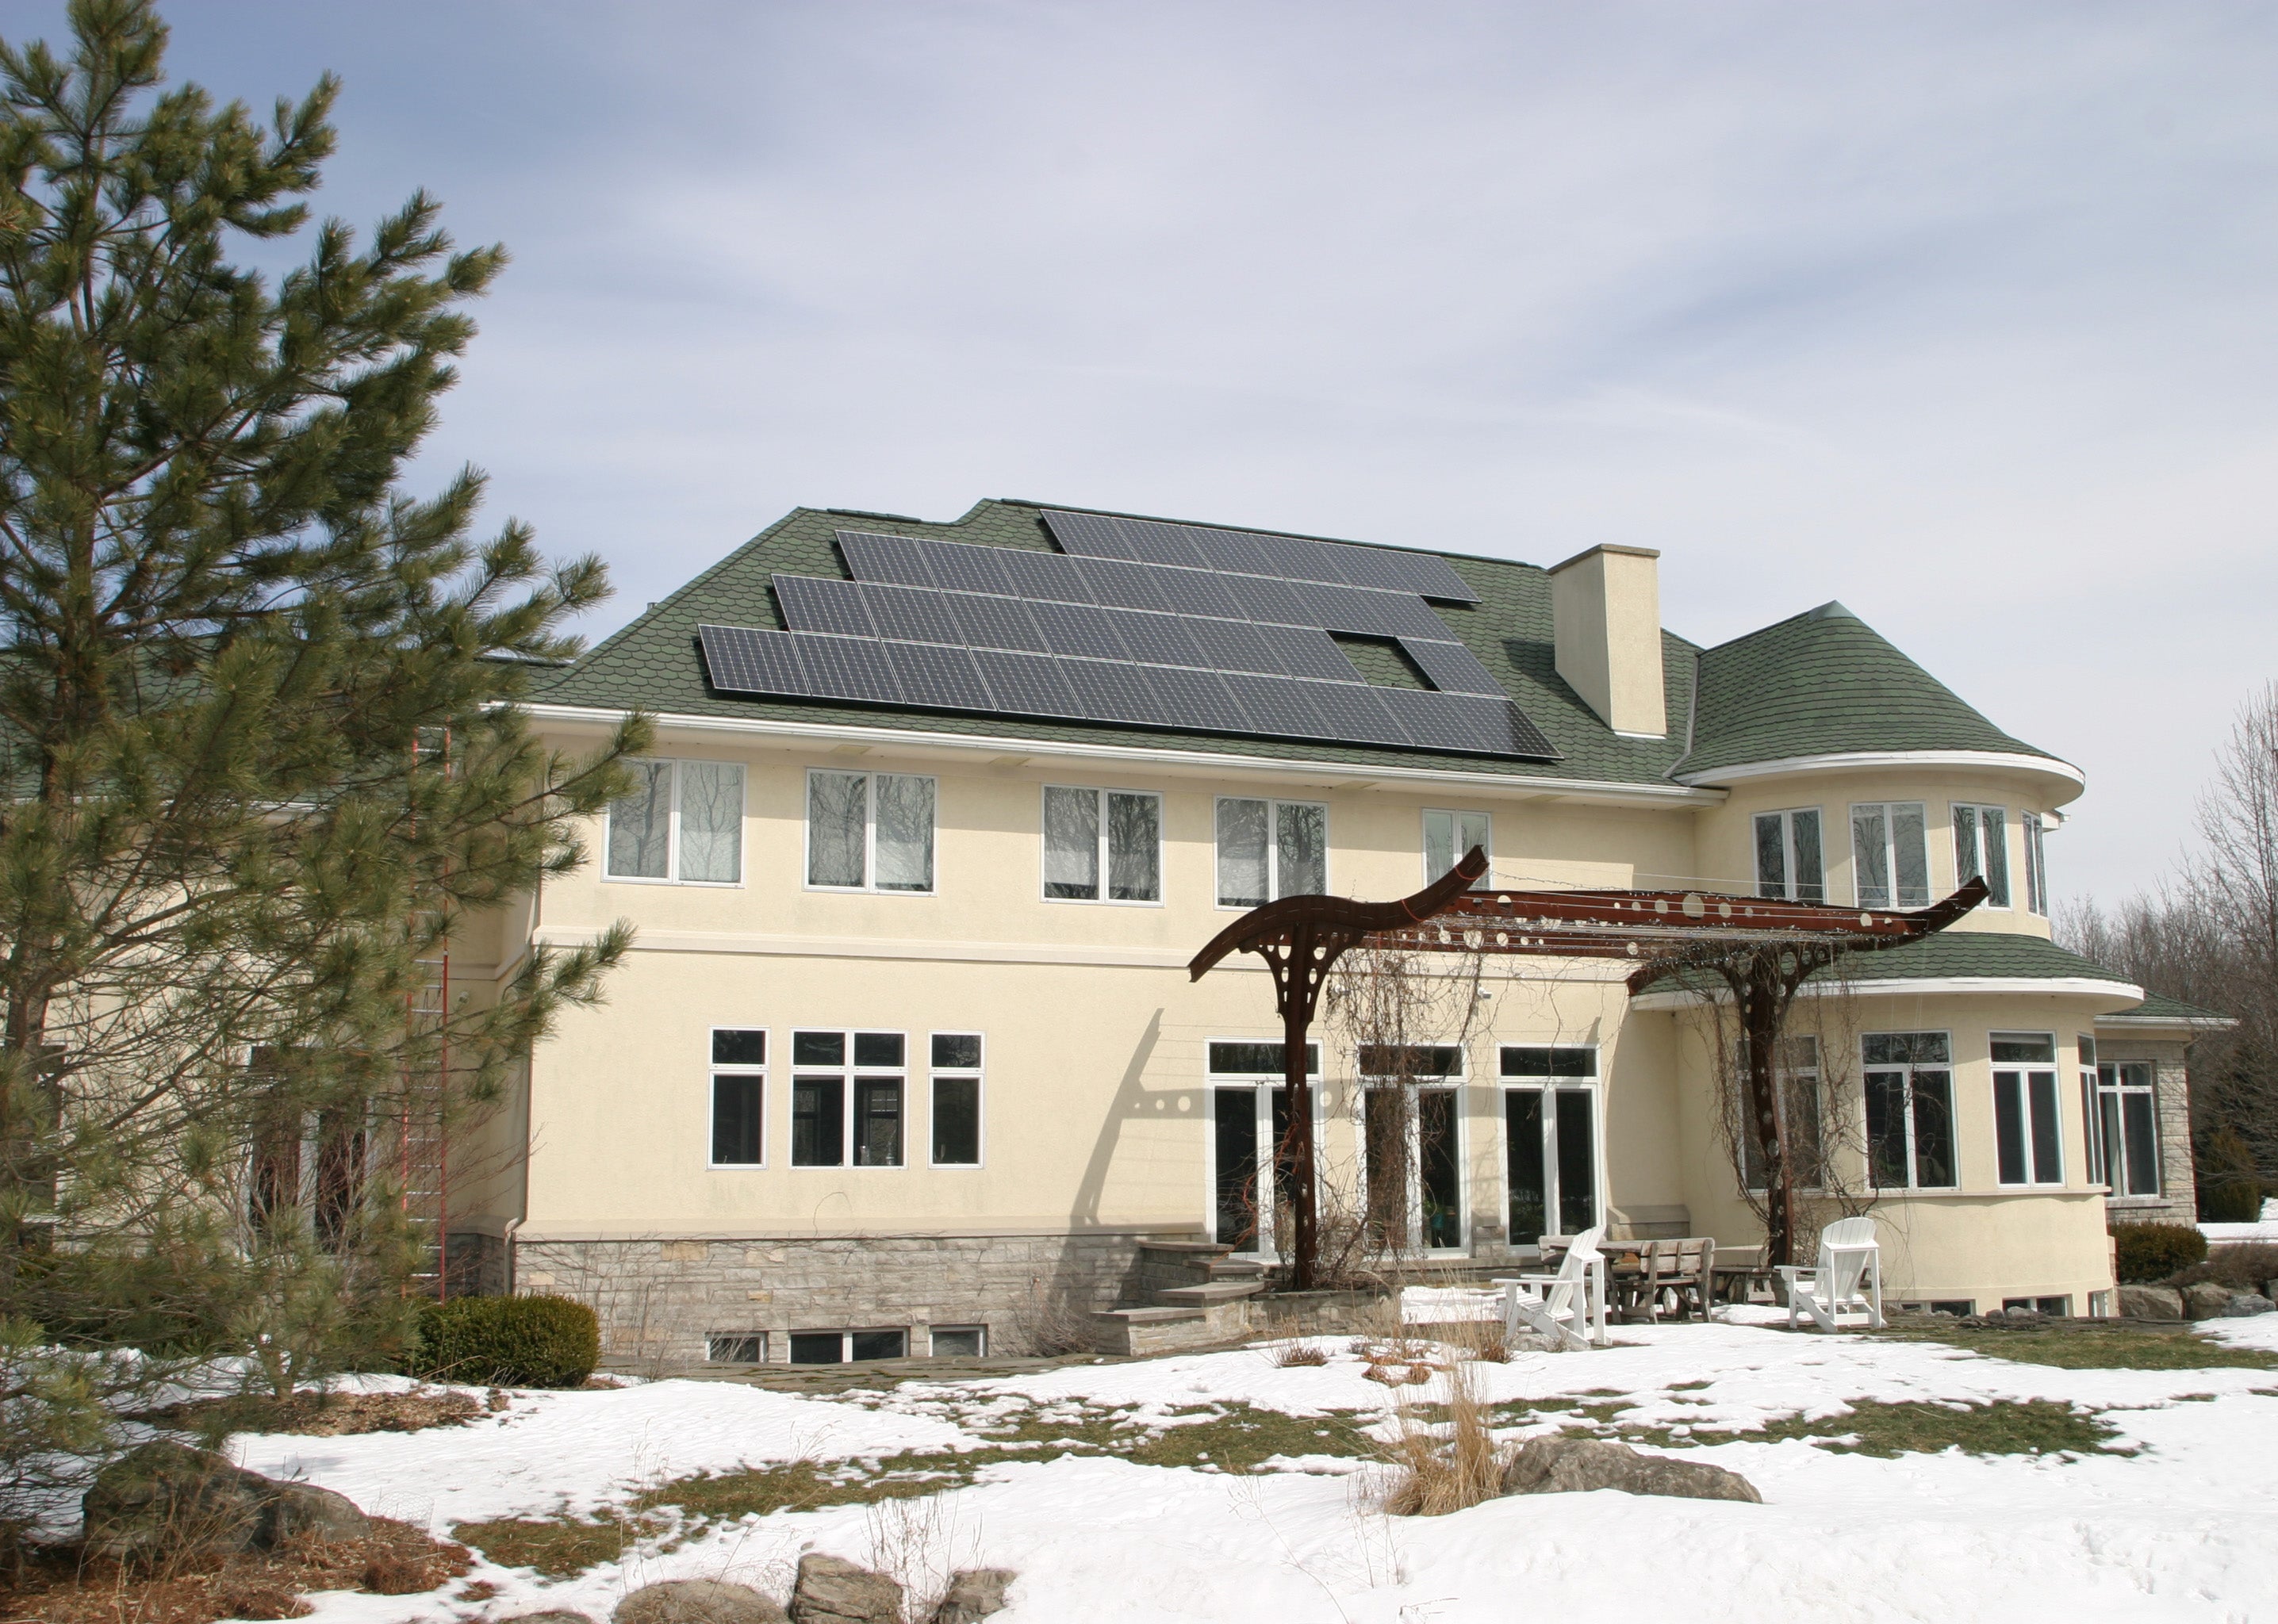 Silevo Panels in East Amherst, NY